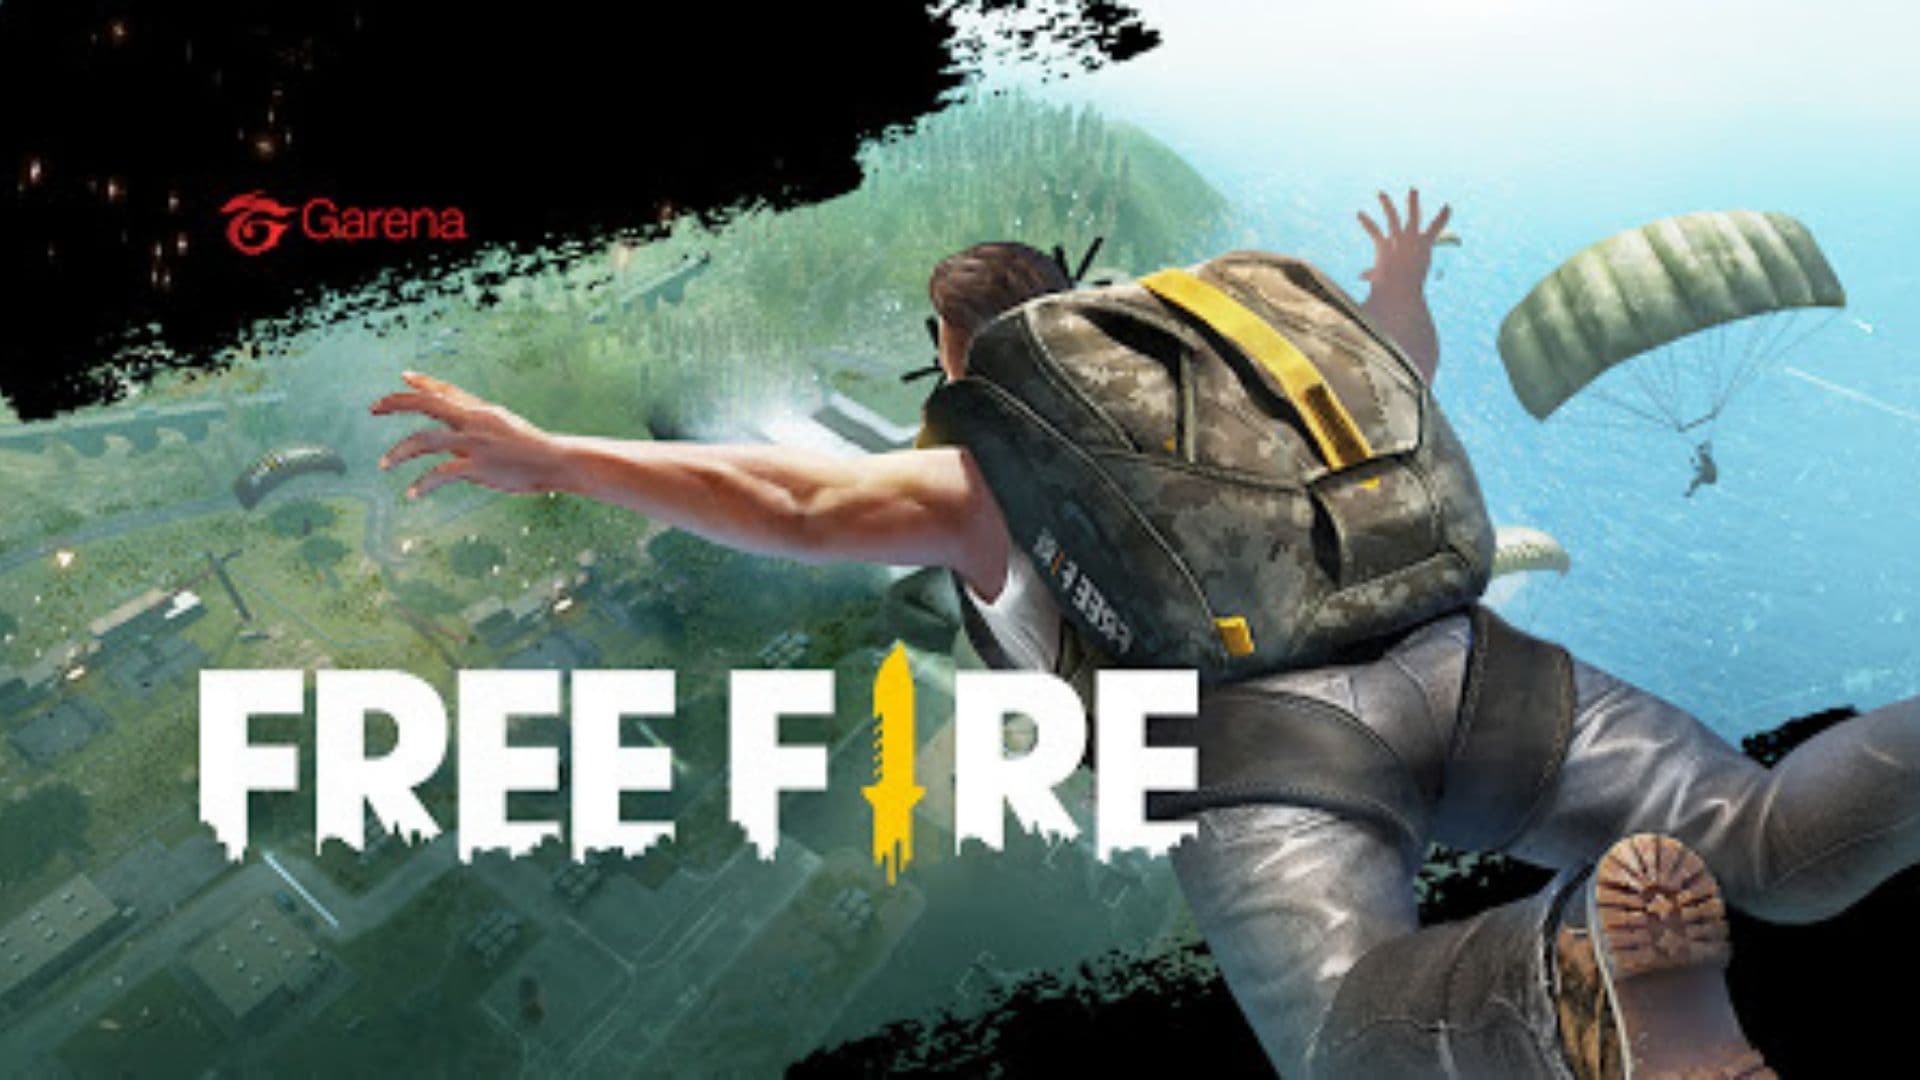  A man skydiving with a parachute with the Garena Free Fire logo and text 'Free Fire' in the foreground.